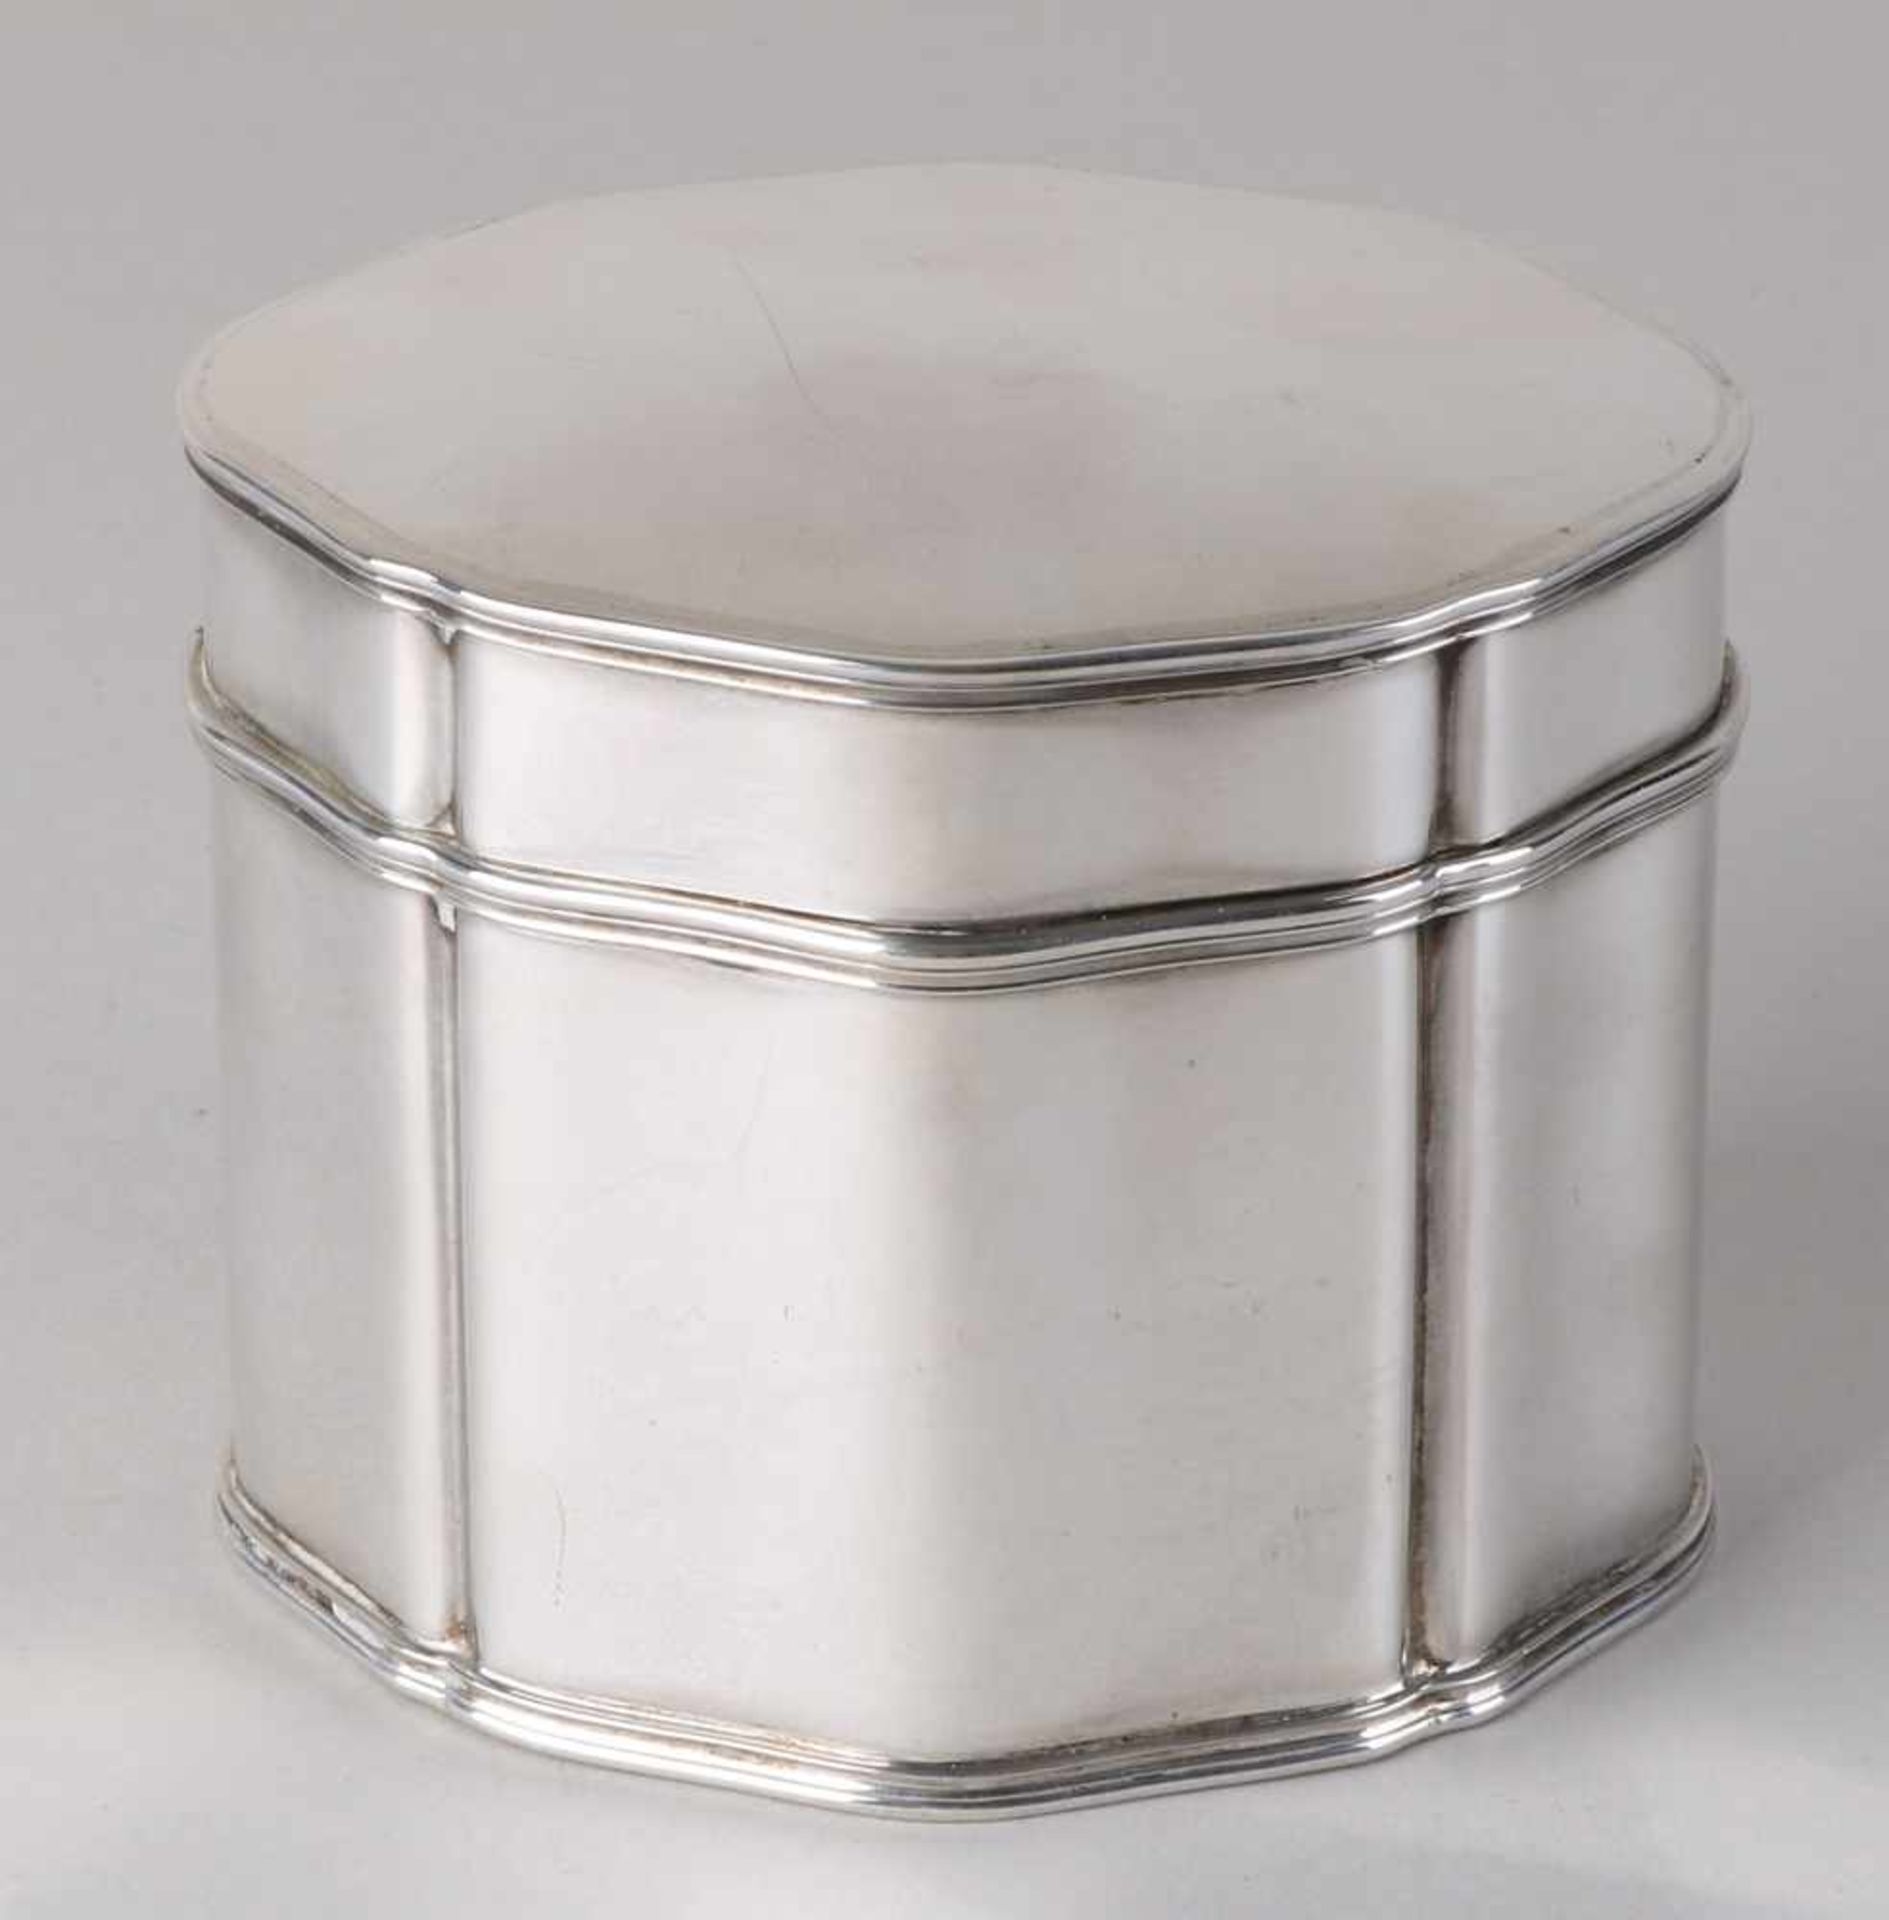 Silver drum, 925/000, oval-contoured model with hinged lid, with a gold-plated interior. 12x10x10